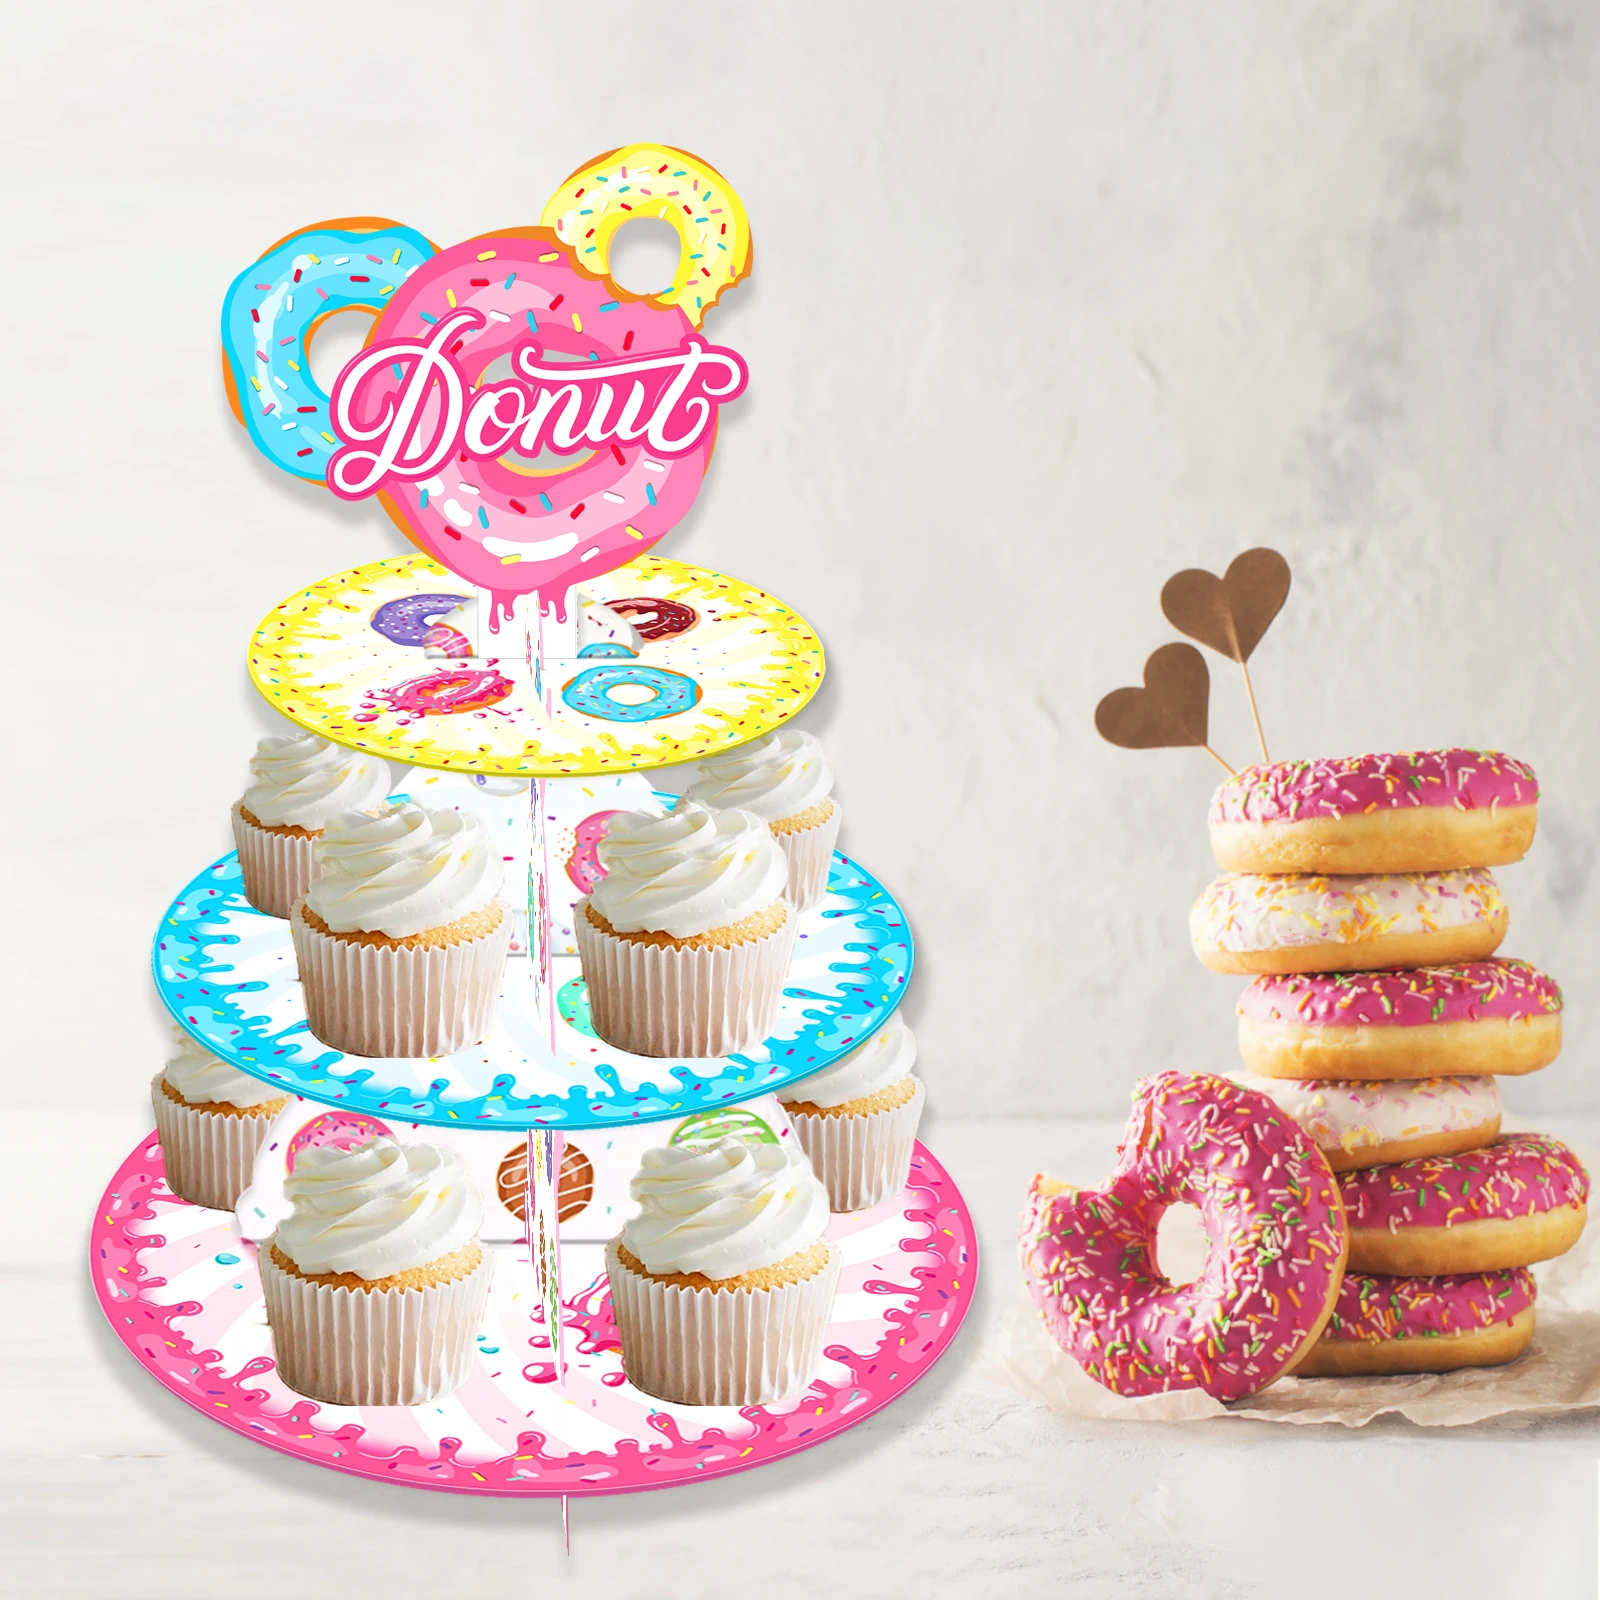 

3 Tiers Cartoon Sweet Donuts Cookie Theme Paper Cupcake Tray Rack Cake Display Stand Birthday Baby Shower Party Decorations